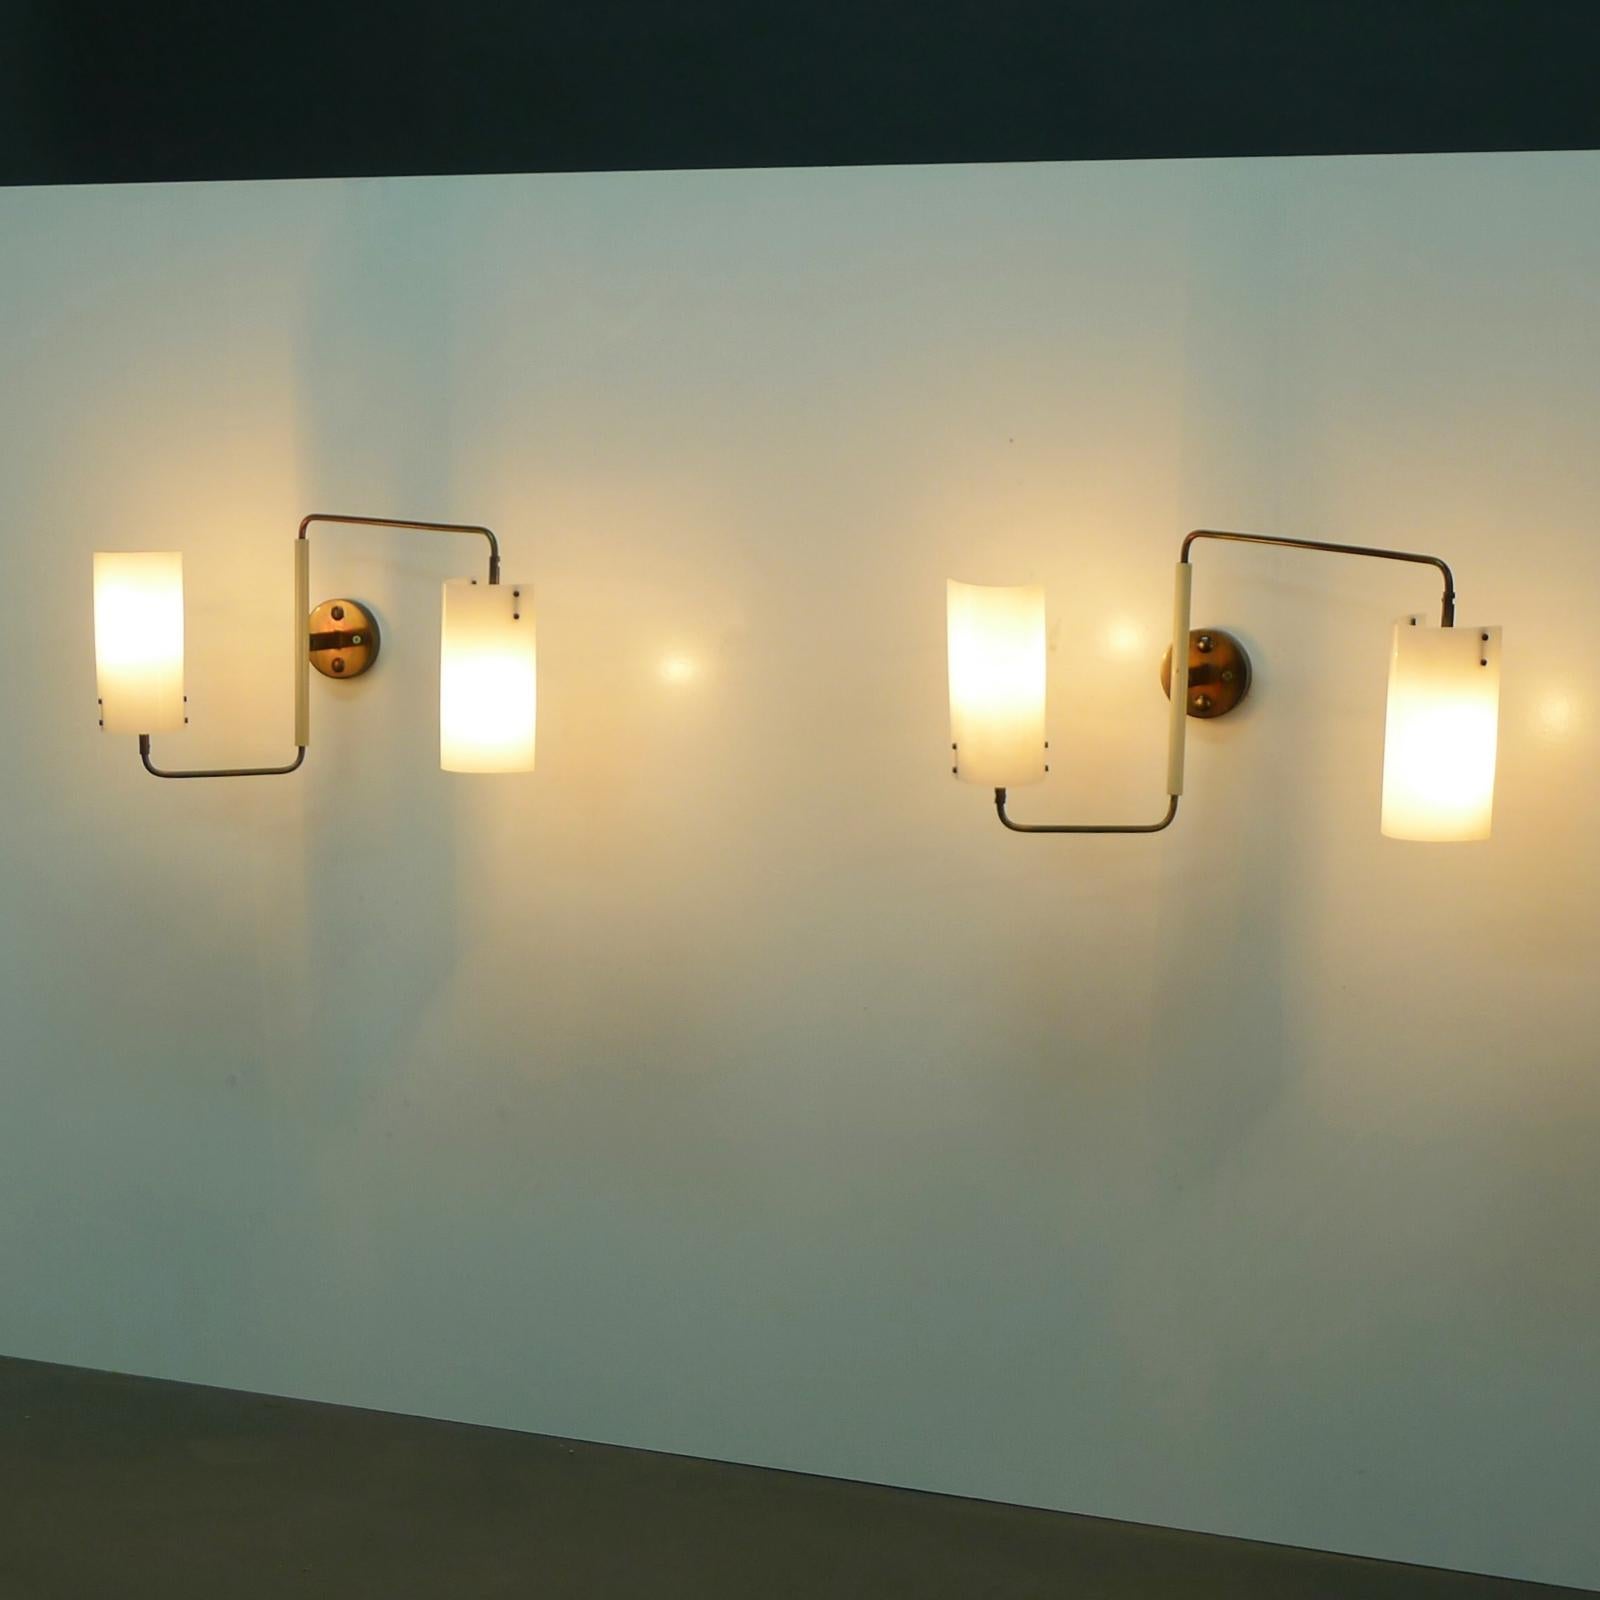 Italian Pair of Oluce Twin-Shade Adjustable Wall Lights, Designed by Tito Agnoli, 1955 For Sale